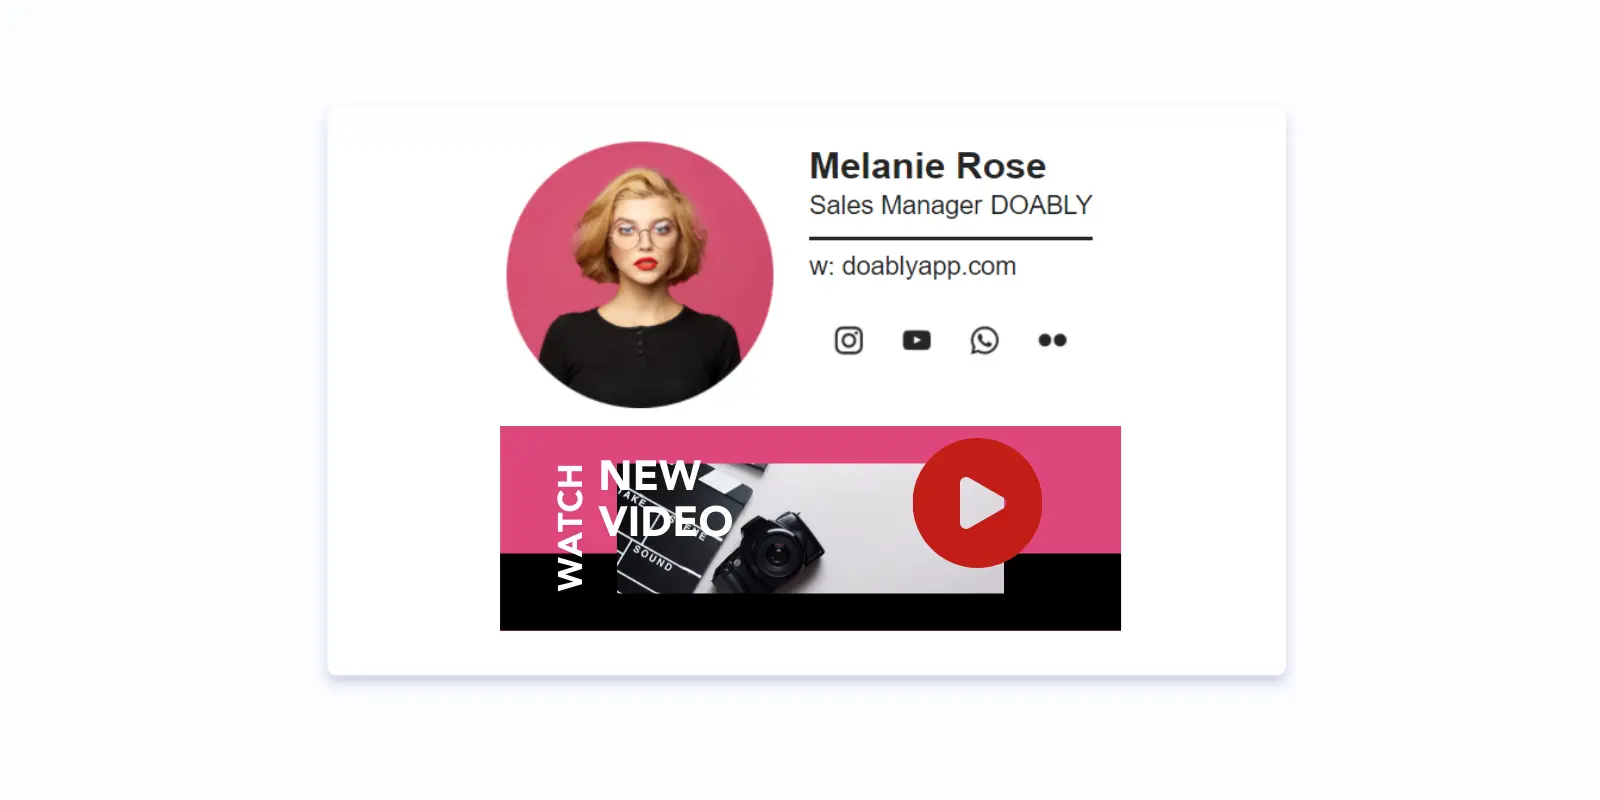 Share new promotional videos in the email signature banner